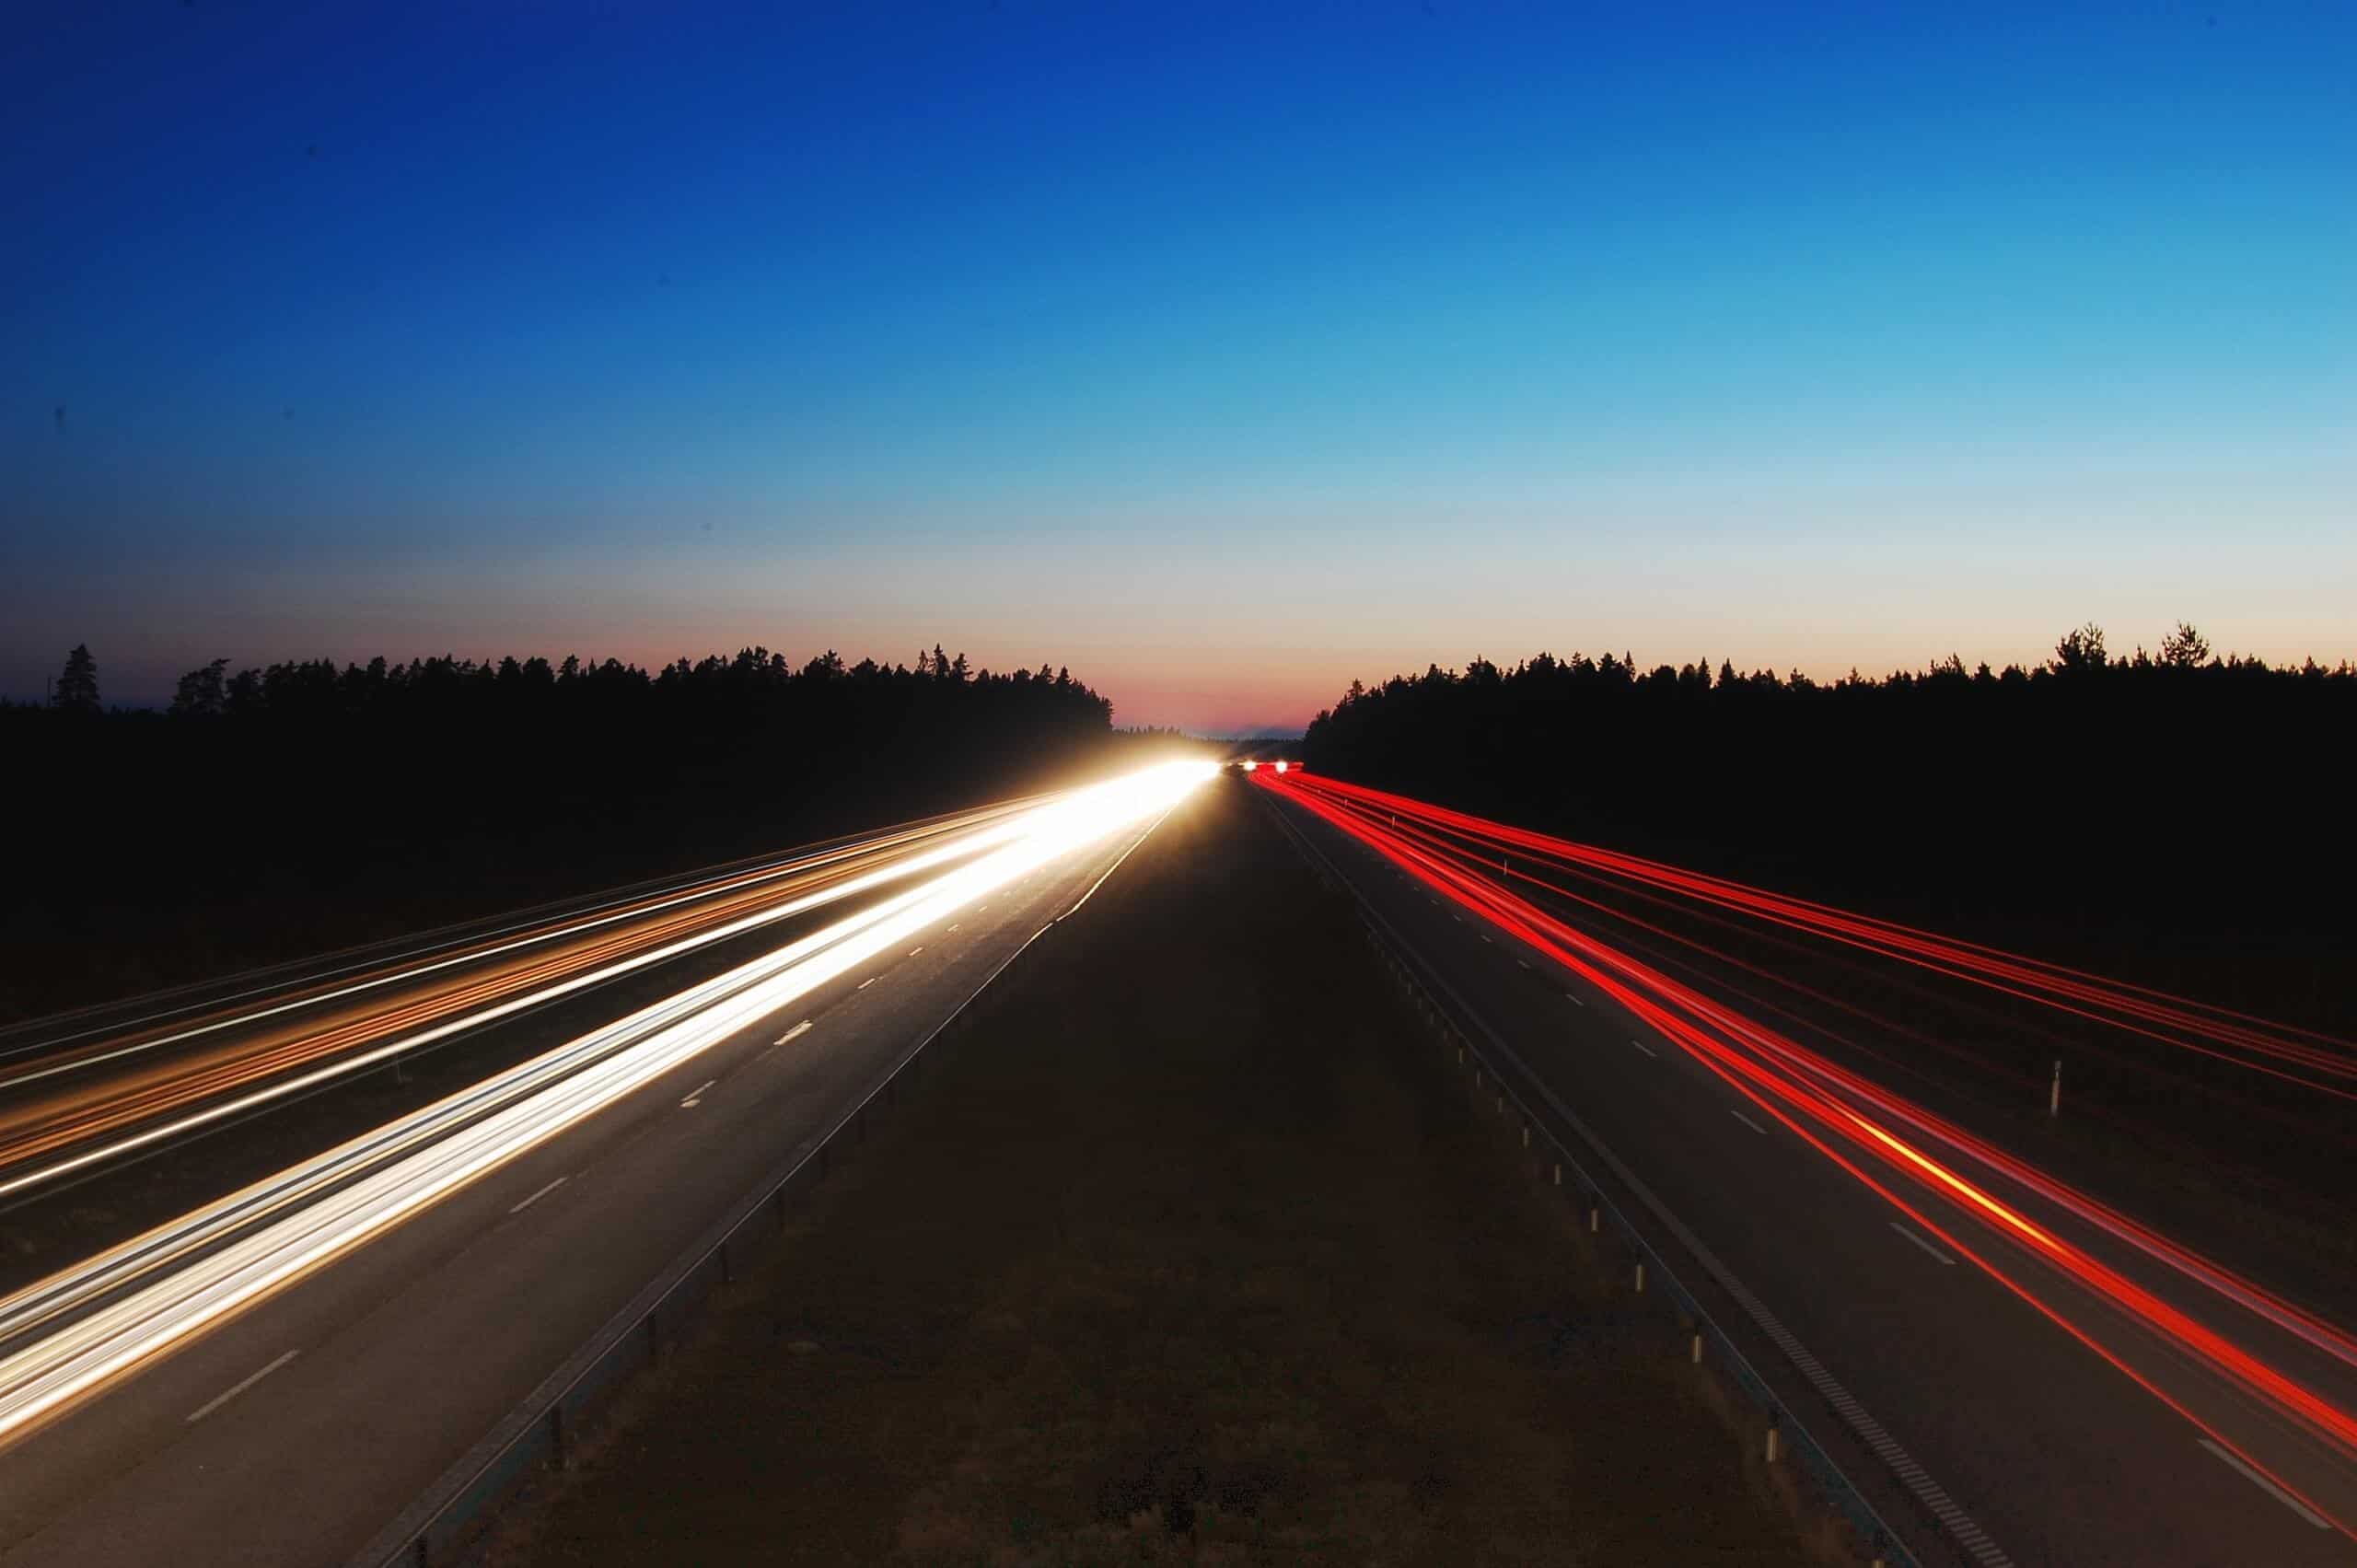 Long exposure of headlights on an interstate at night